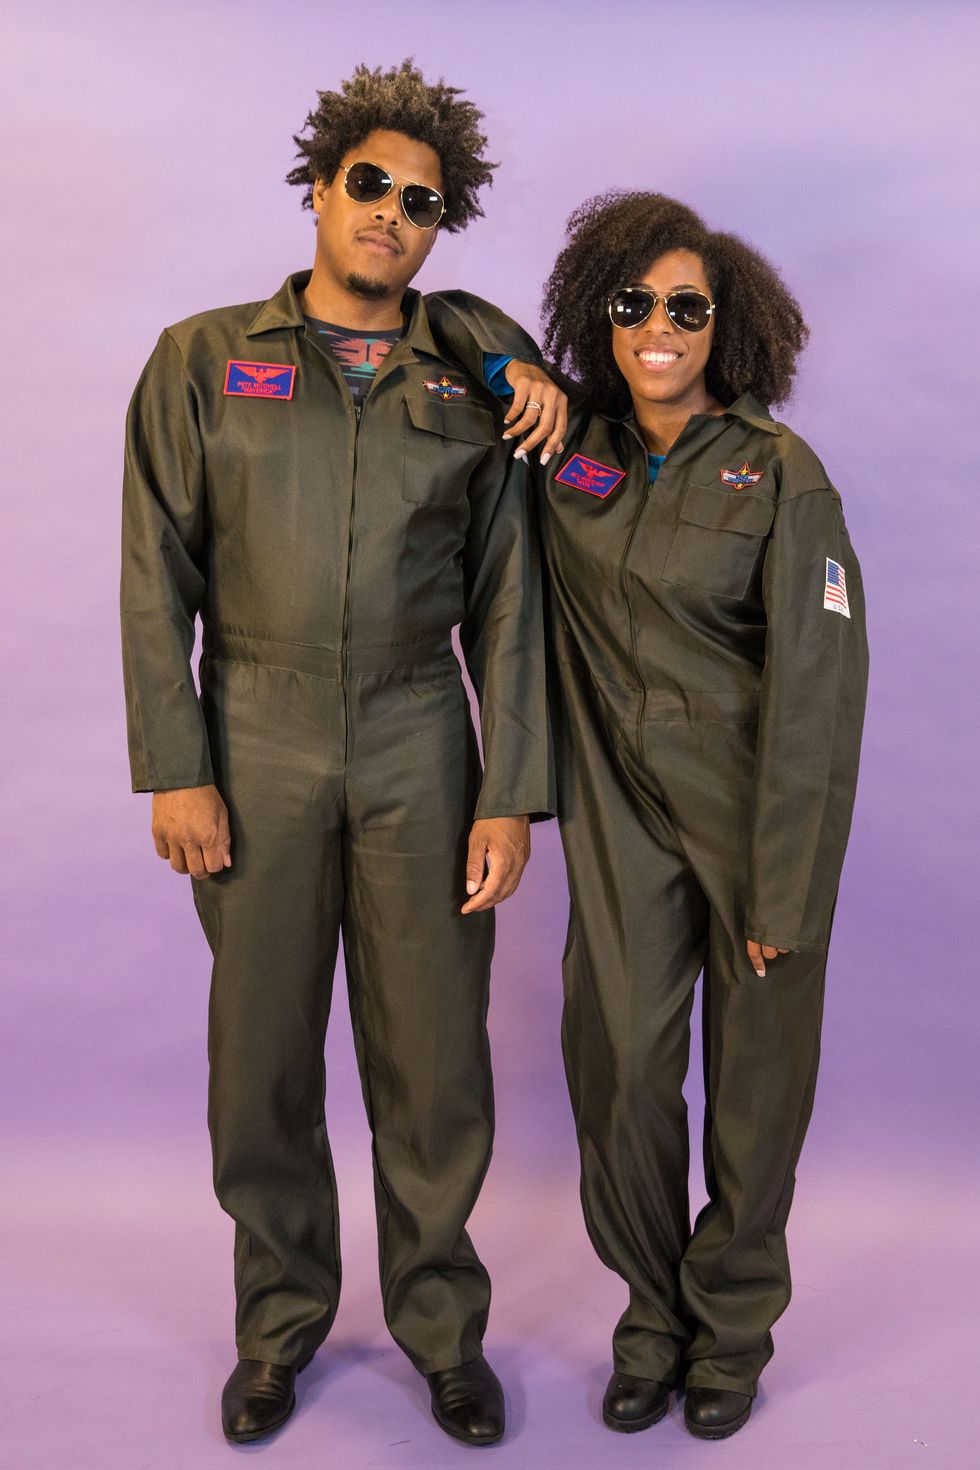 a man and woman wearing aviator suits and shades as part of a top gun goose and maverick couples costume